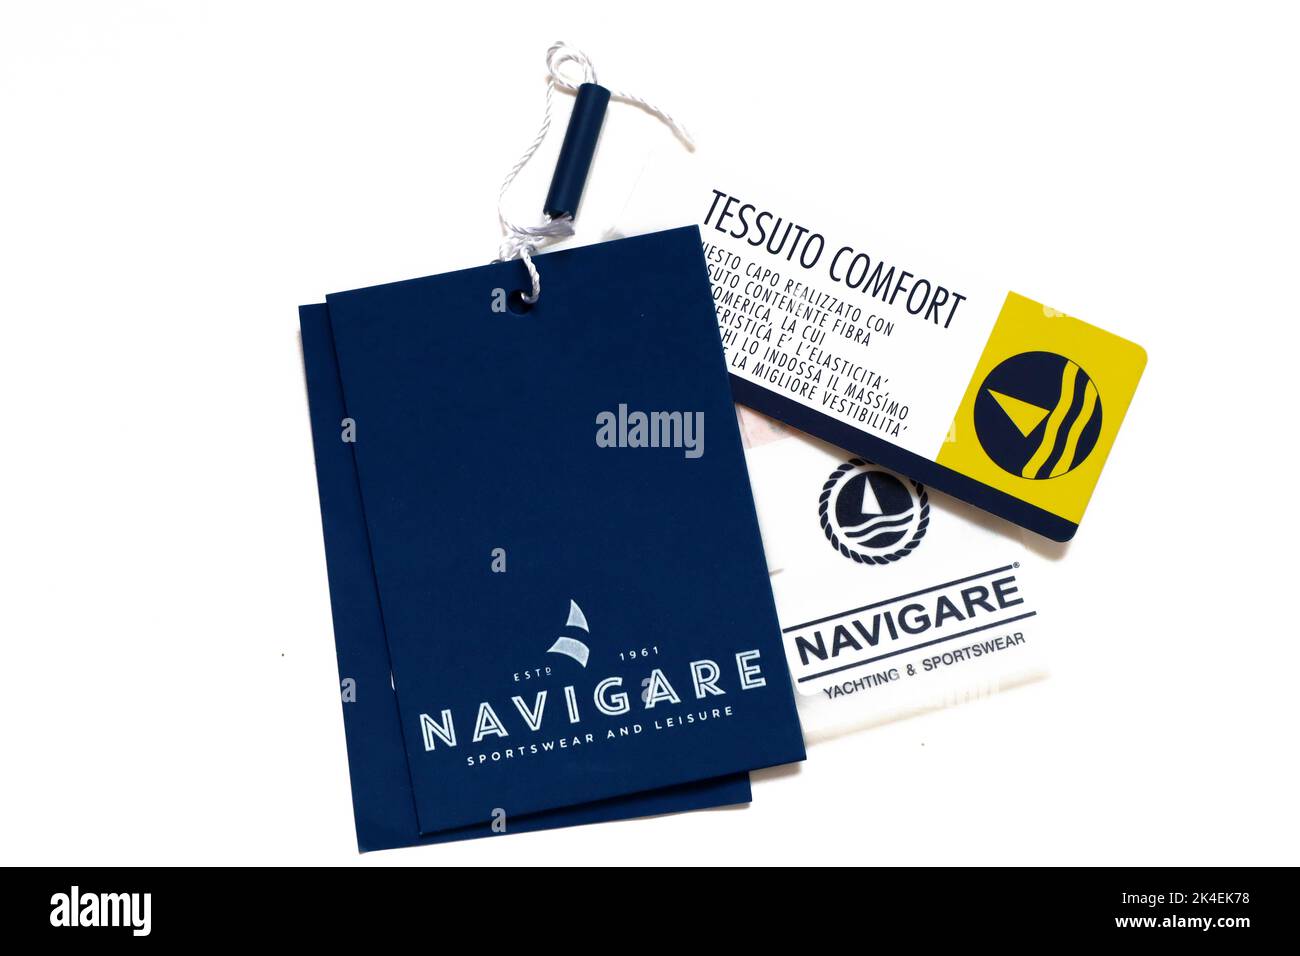 Navigare Cut Out Stock Images & Pictures - Alamy